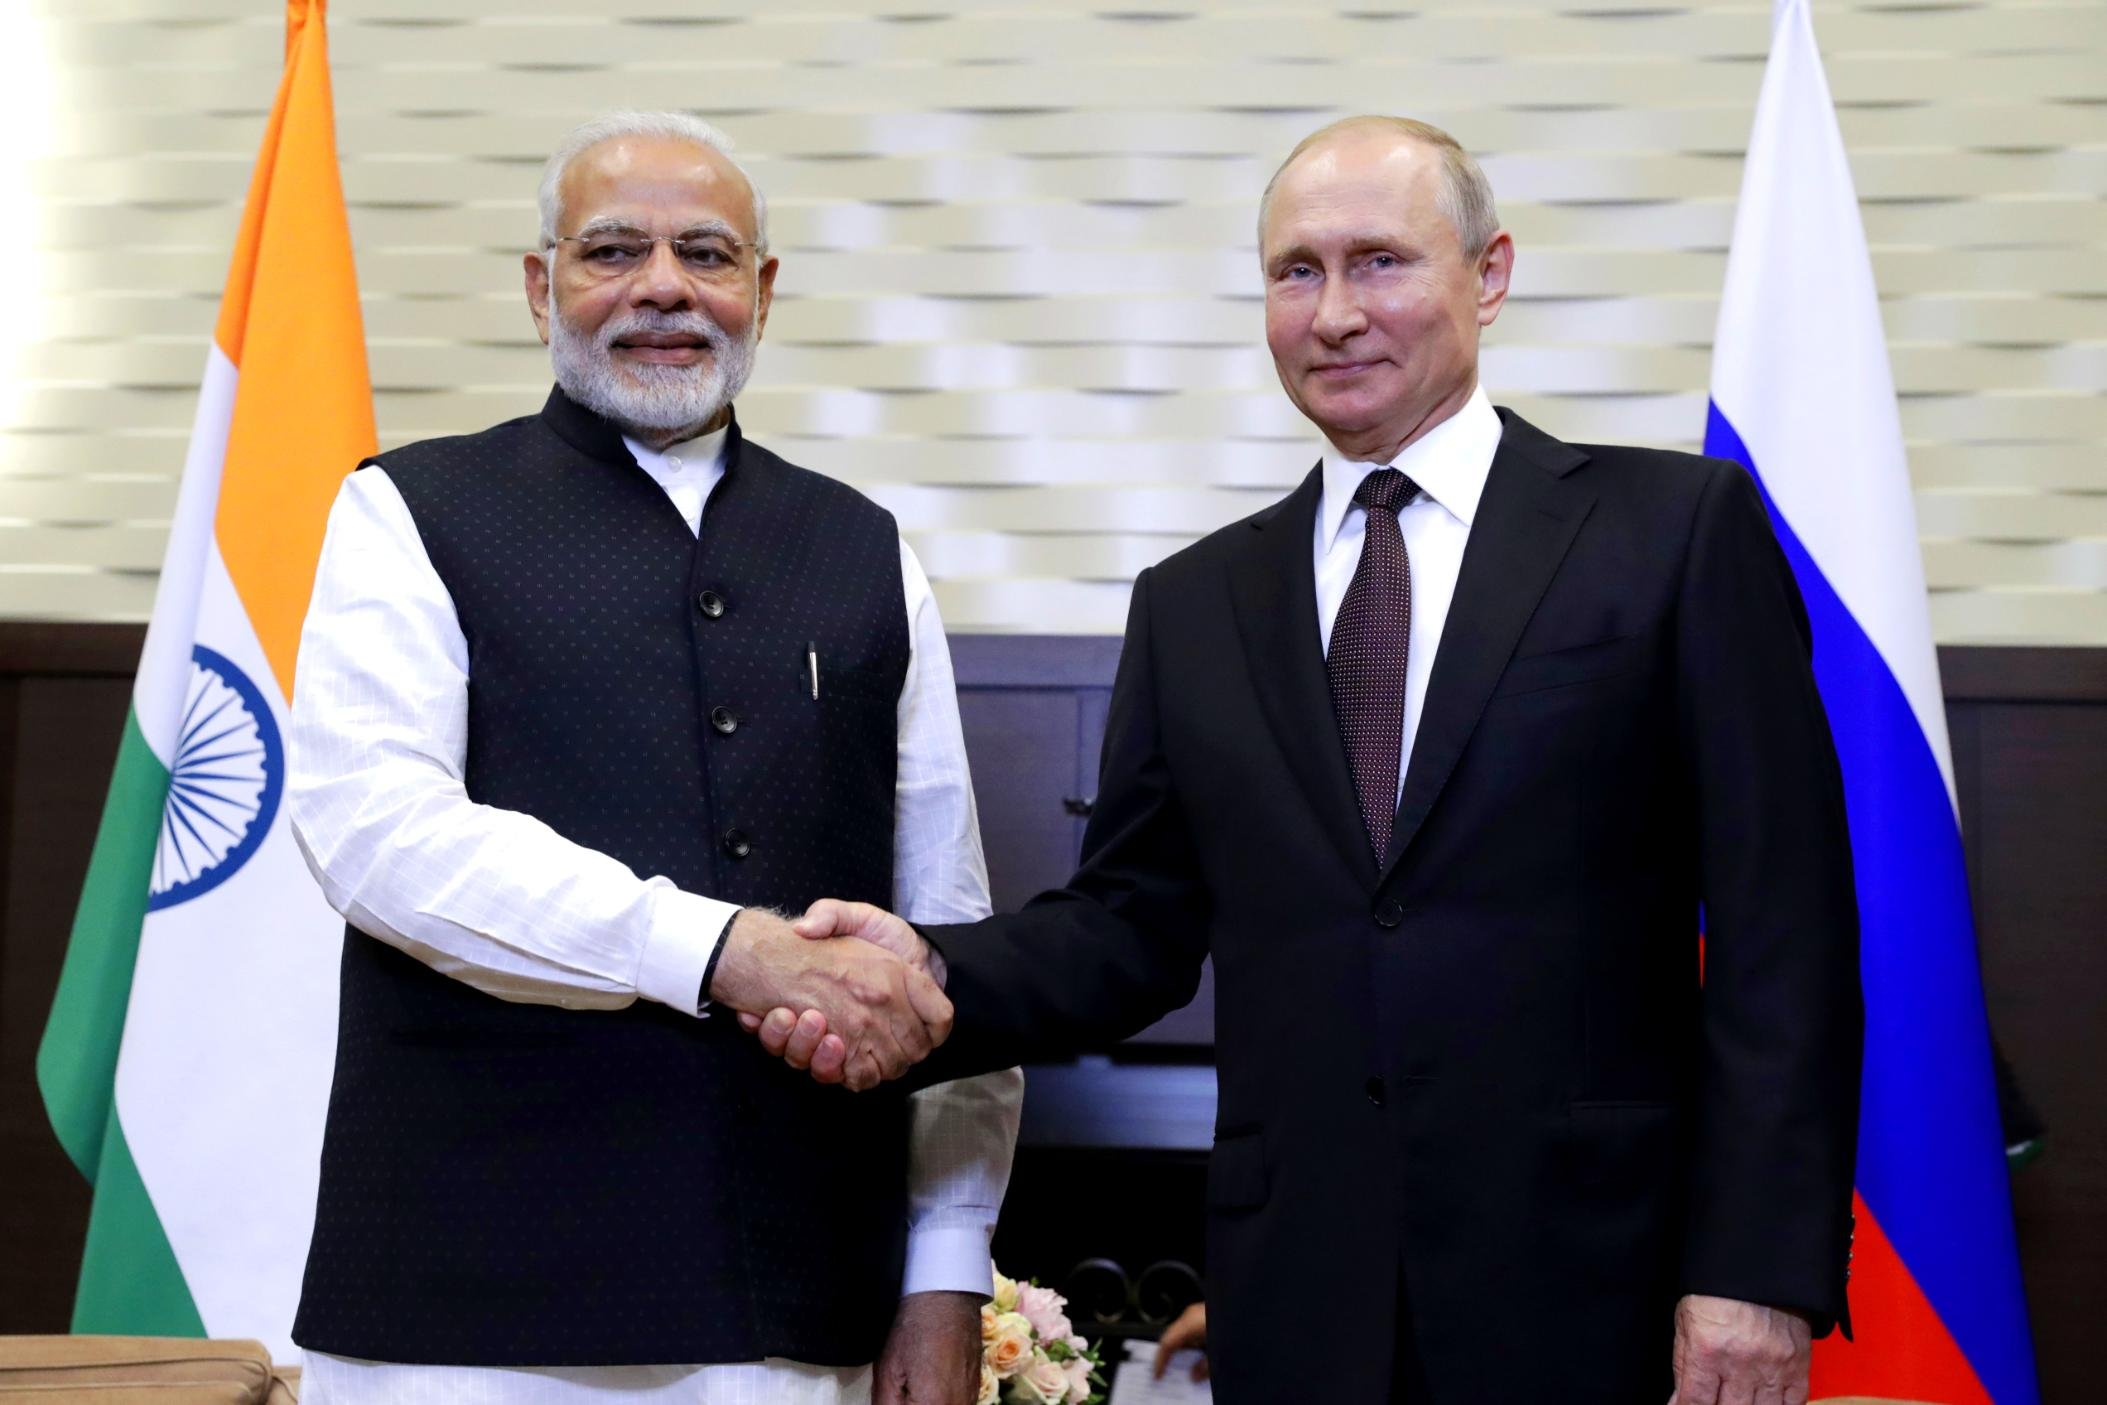 The strategic meeting between Putin and Modi and Biden appointed it